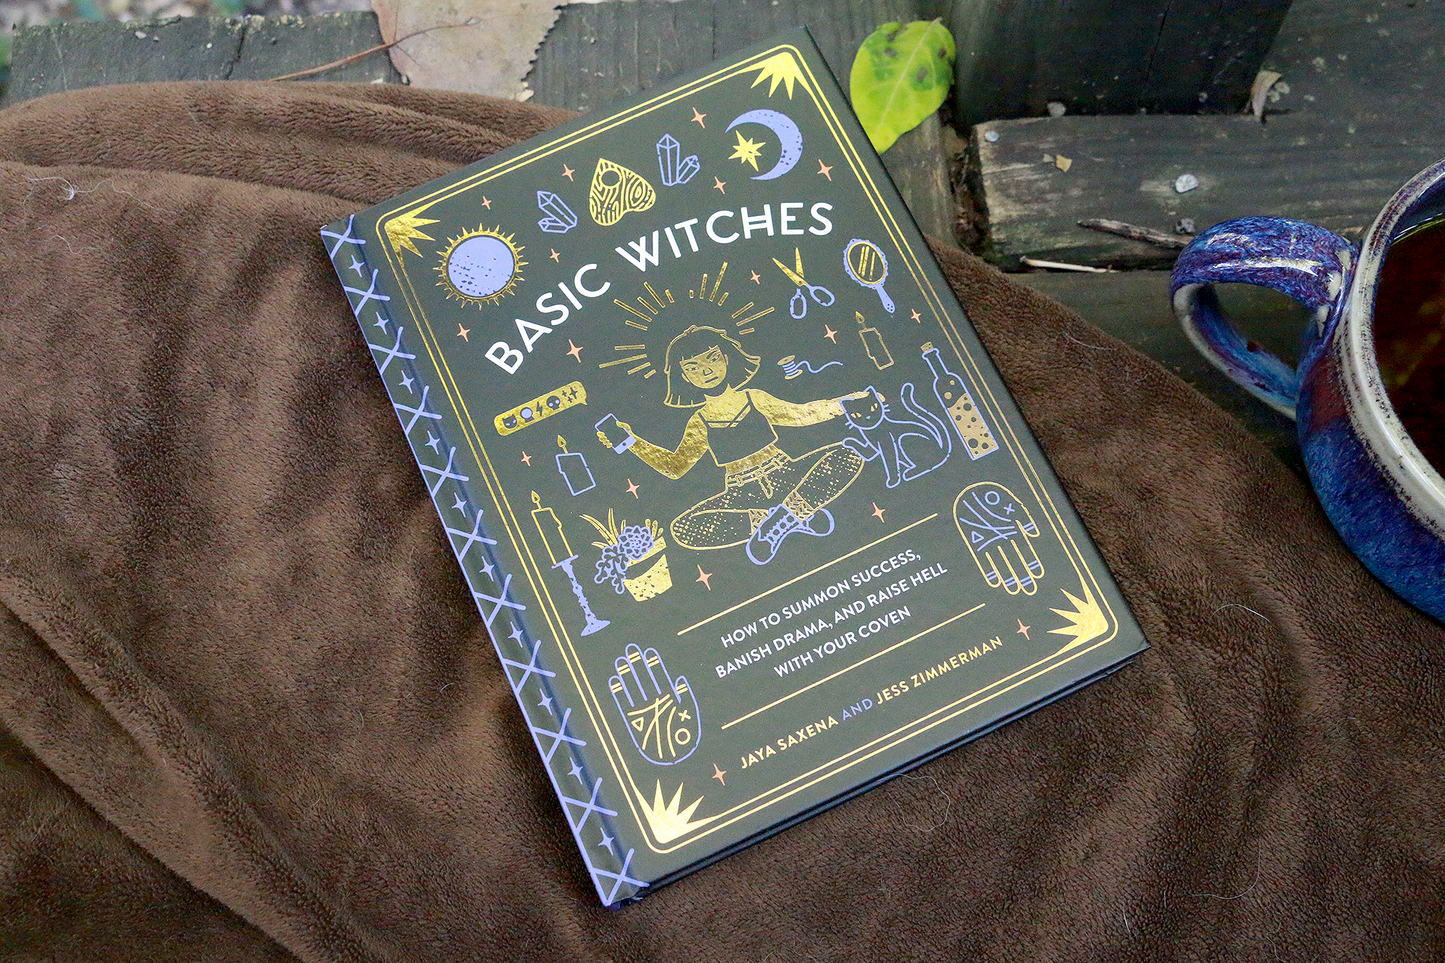 Basic Witches: Raise Hell with Your Coven